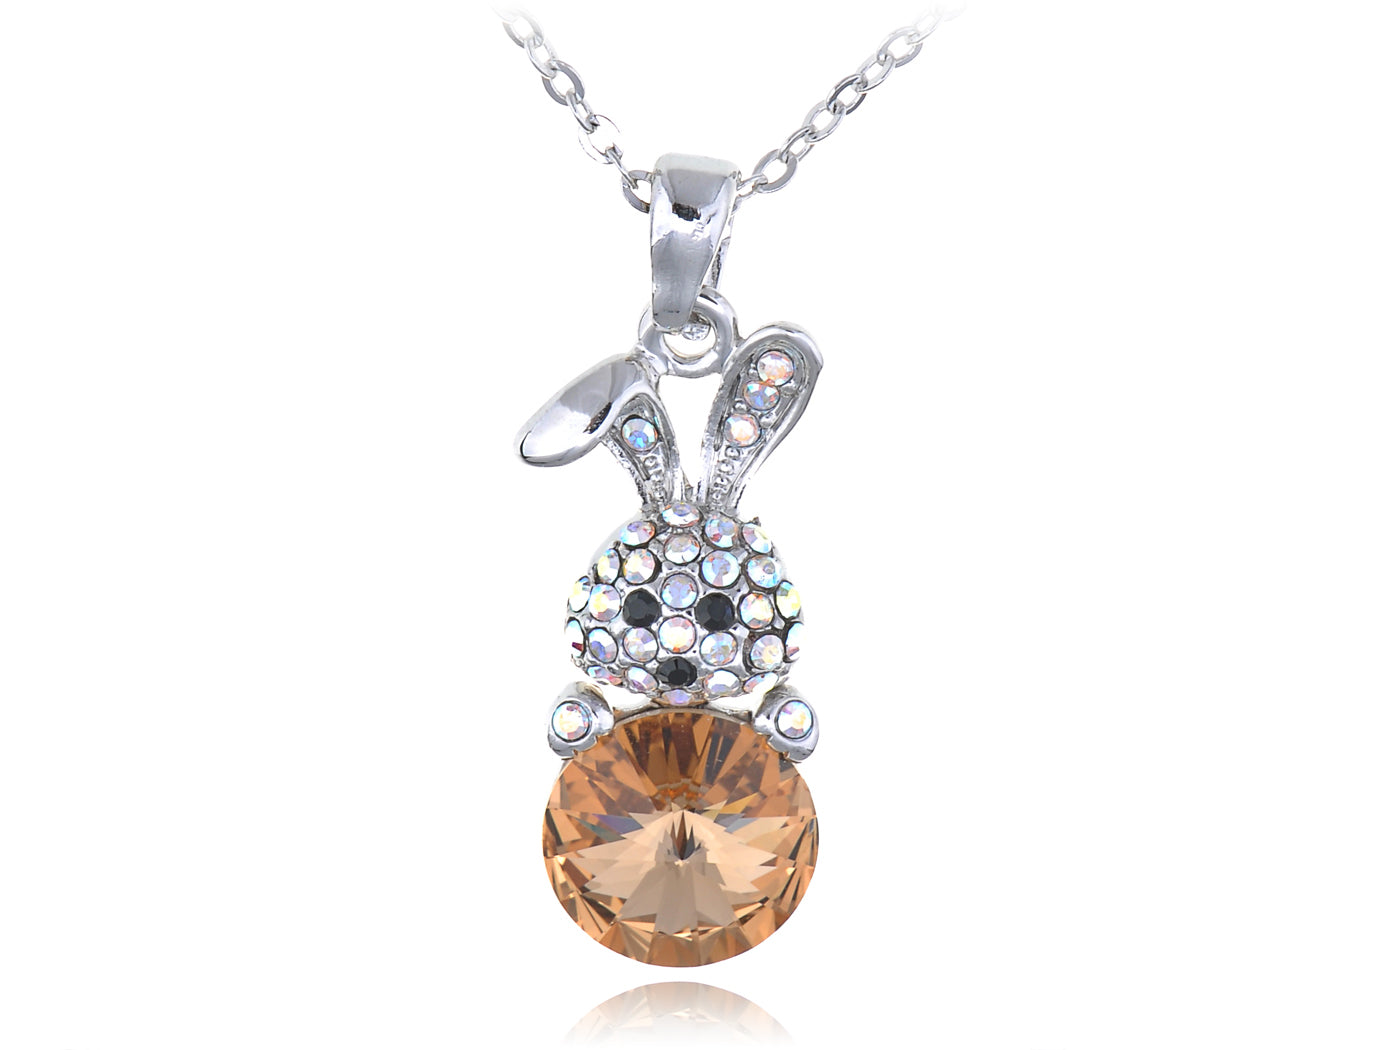 Swarovski Crystal Curious Animal Bunny Rabbit With Rose Or Topaz Easter Egg Pendant Necklace